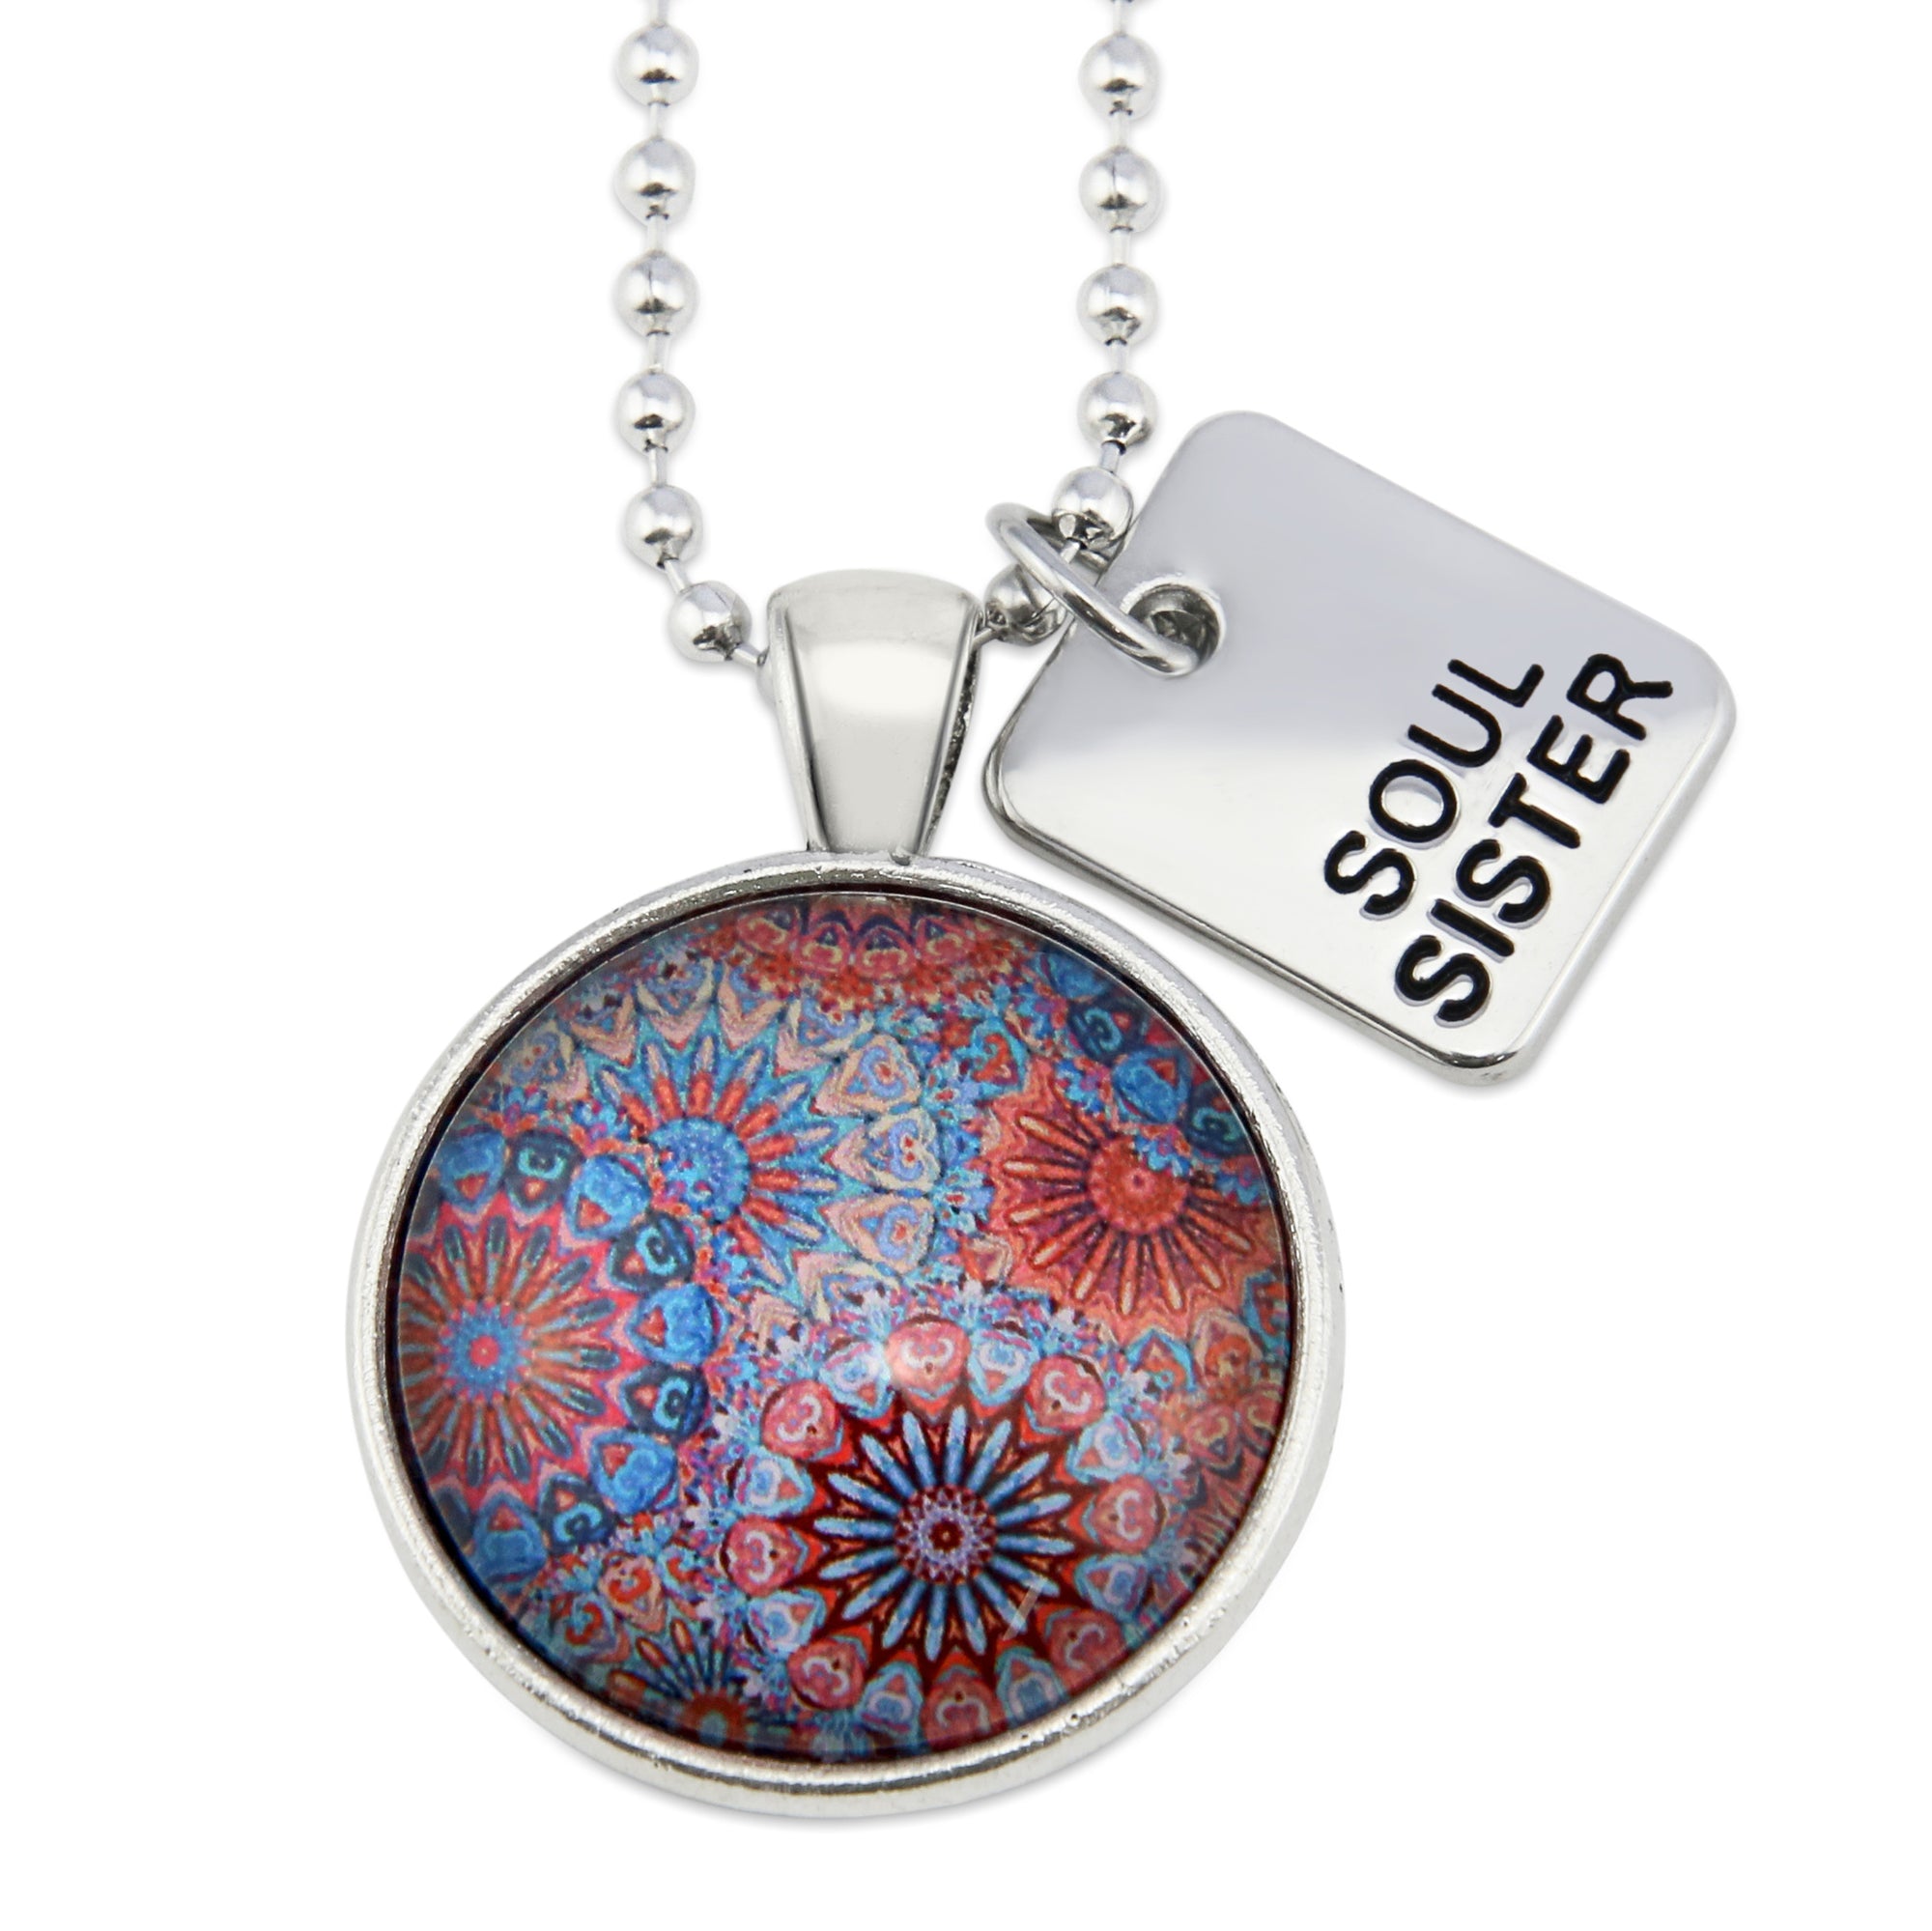 Blue, red and orange patterned print pendant necklace in vintage silver with ball chain and Soul Sister word charm.